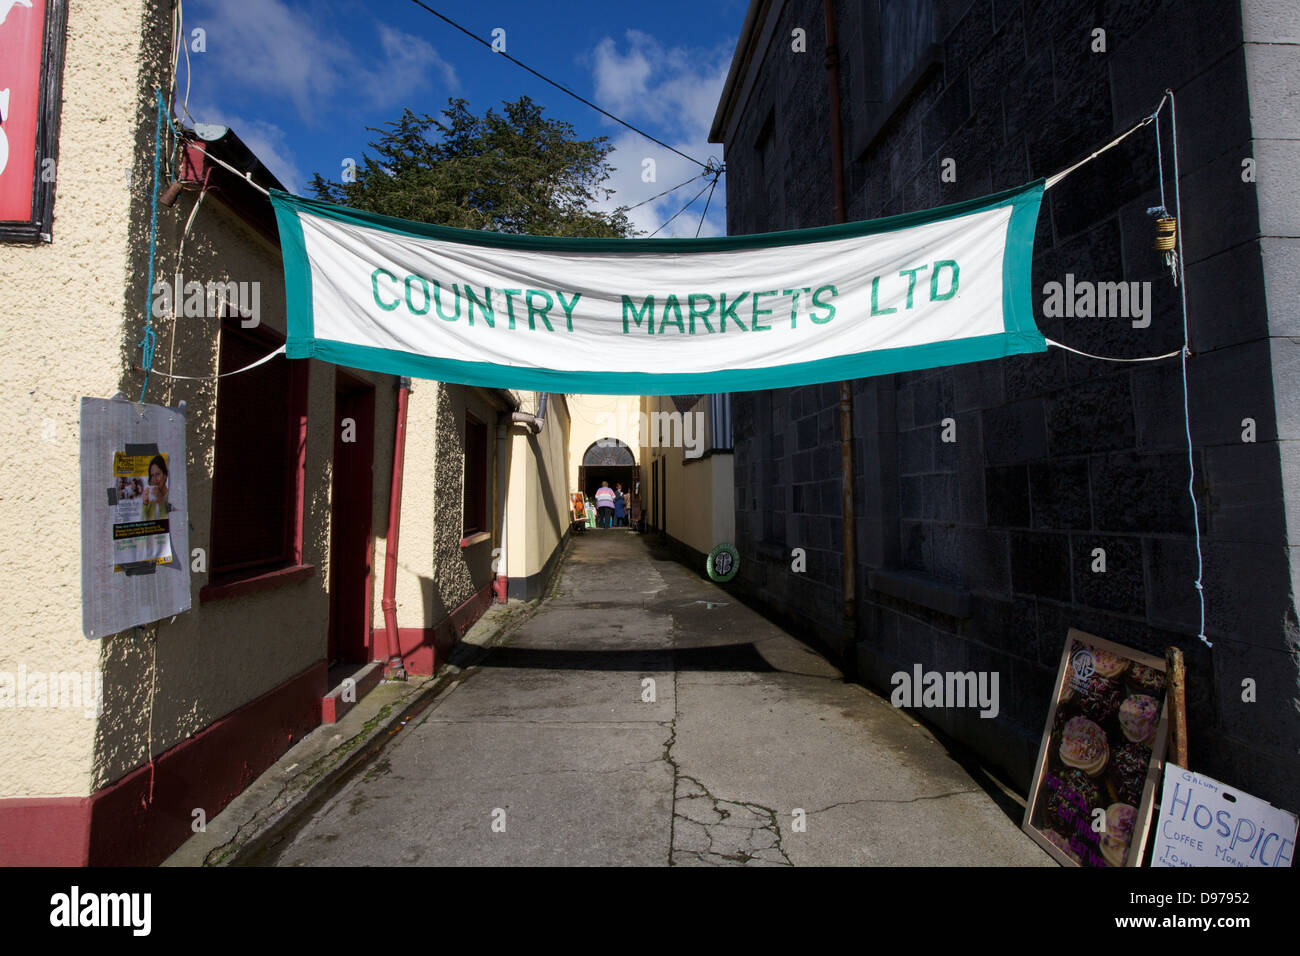 Sign for a country market in rural Ireland. Stock Photo